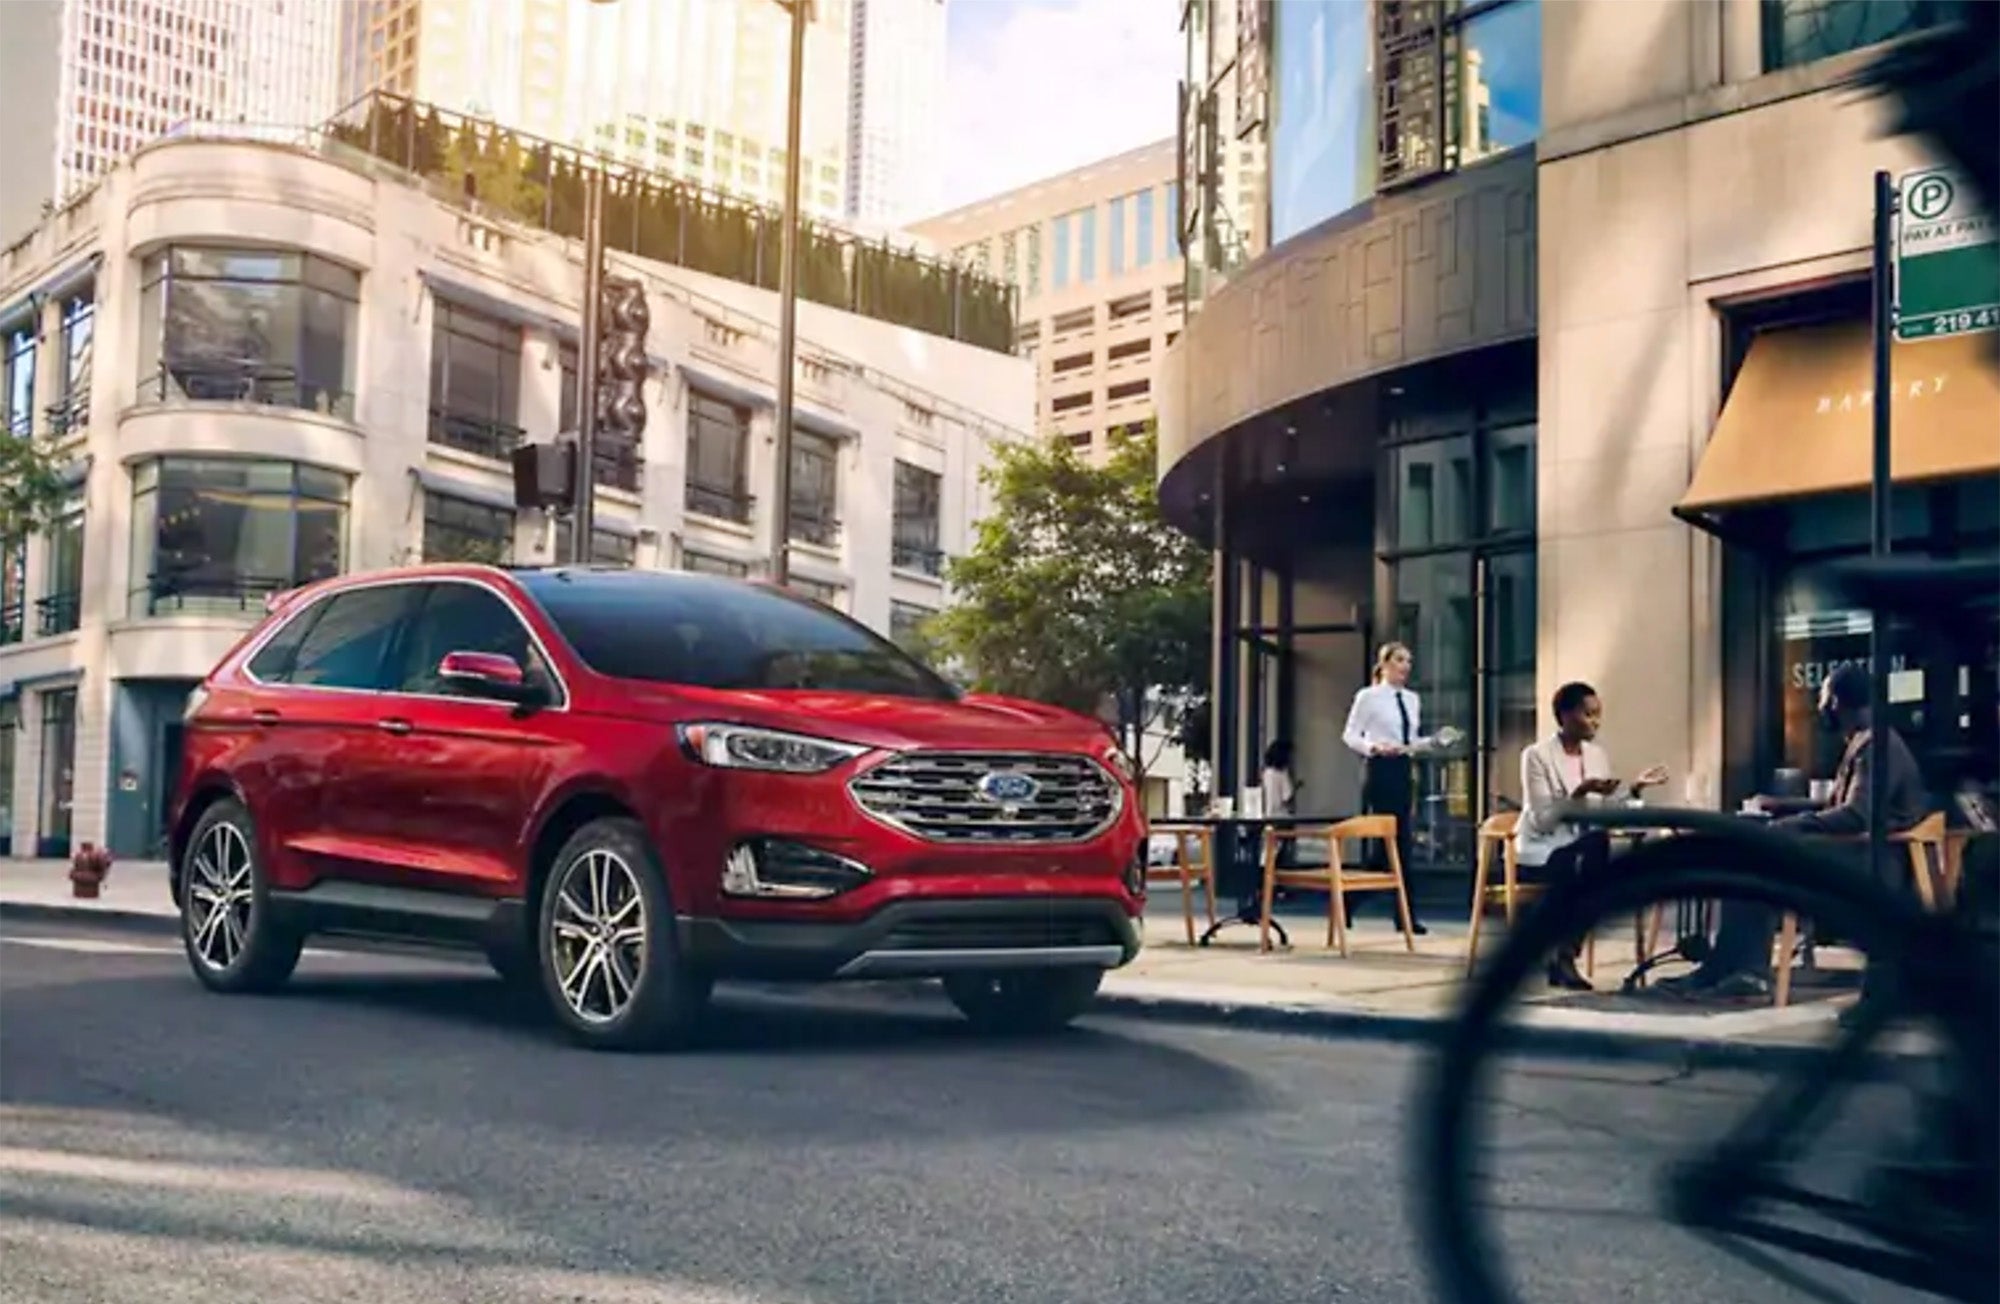 Review: 2019 Ford Edge ST is fast and fun, until you hit corners